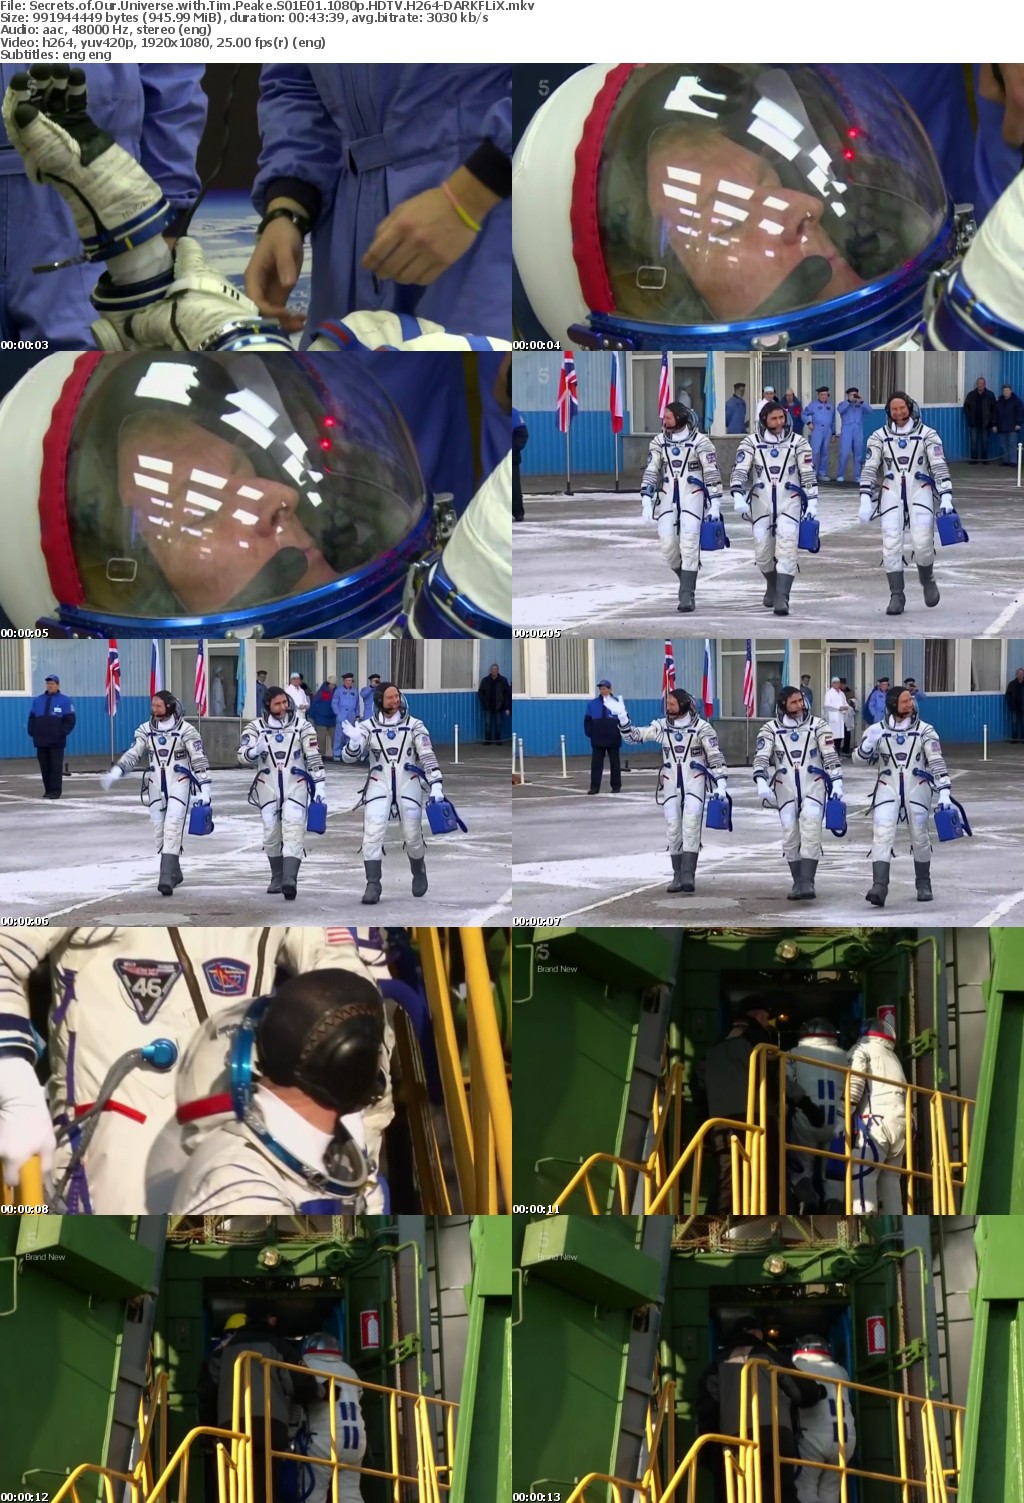 Secrets of Our Universe with Tim Peake S01E01 1080p HDTV H264-DARKFLiX